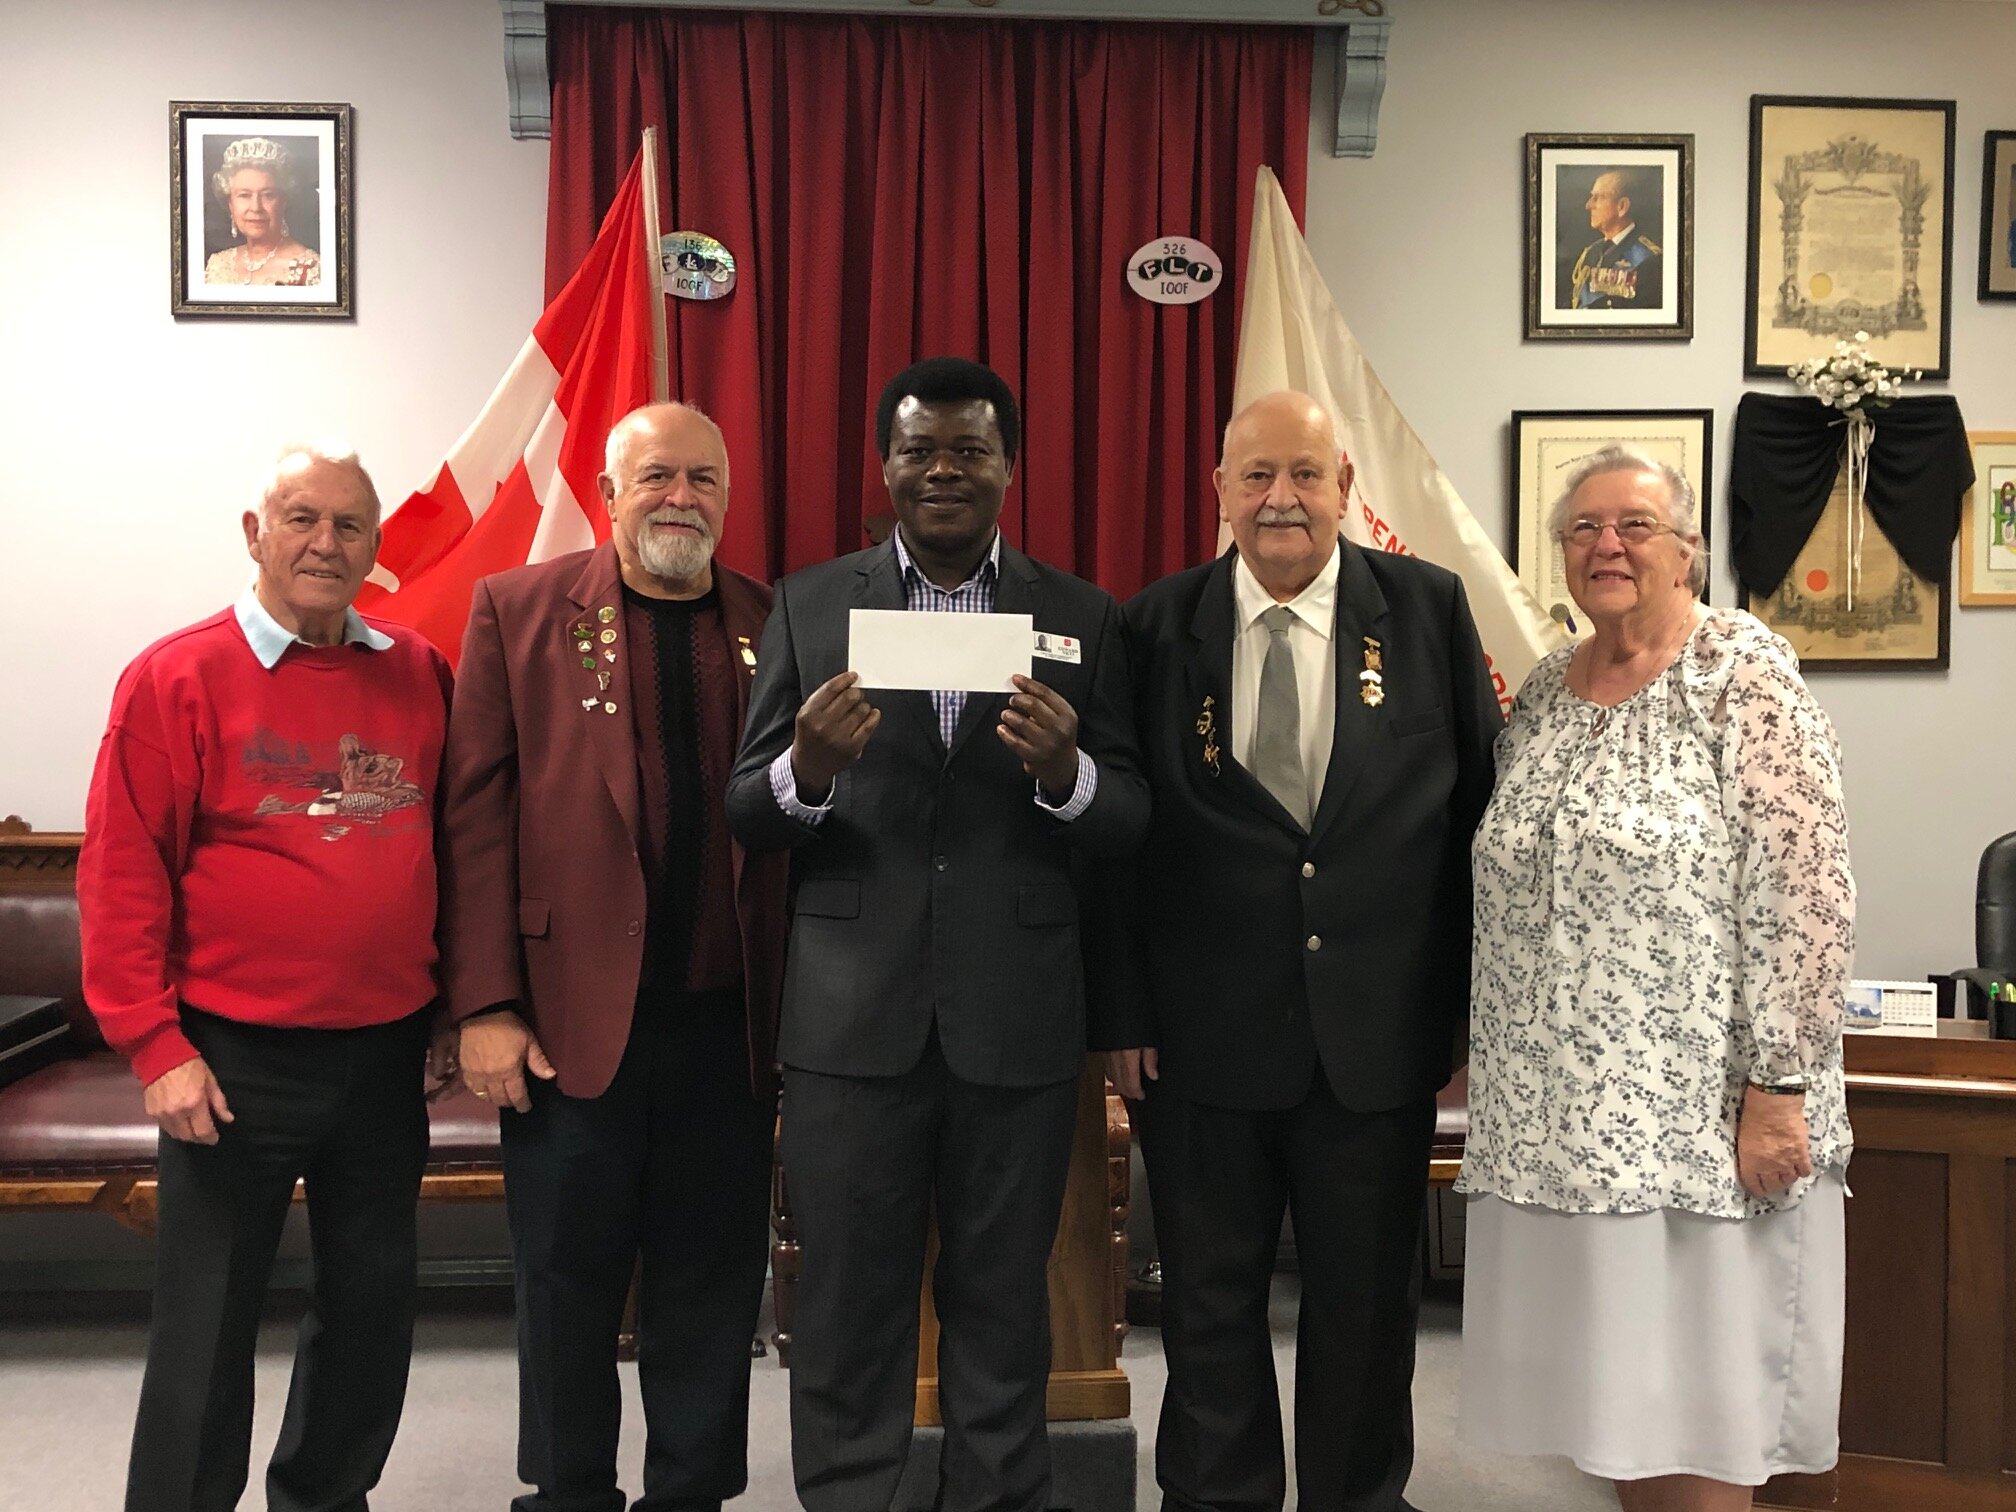  Cobourg Salvation Army Community and Family Services Director Edward Nkyi (centre) was delighted to receive a donation from the Durham Memorial Temple Oddfellows Lodge #78 Port Hope and Rebekahs #131 members (from left) Carl Nelson, Dave Bannister, 